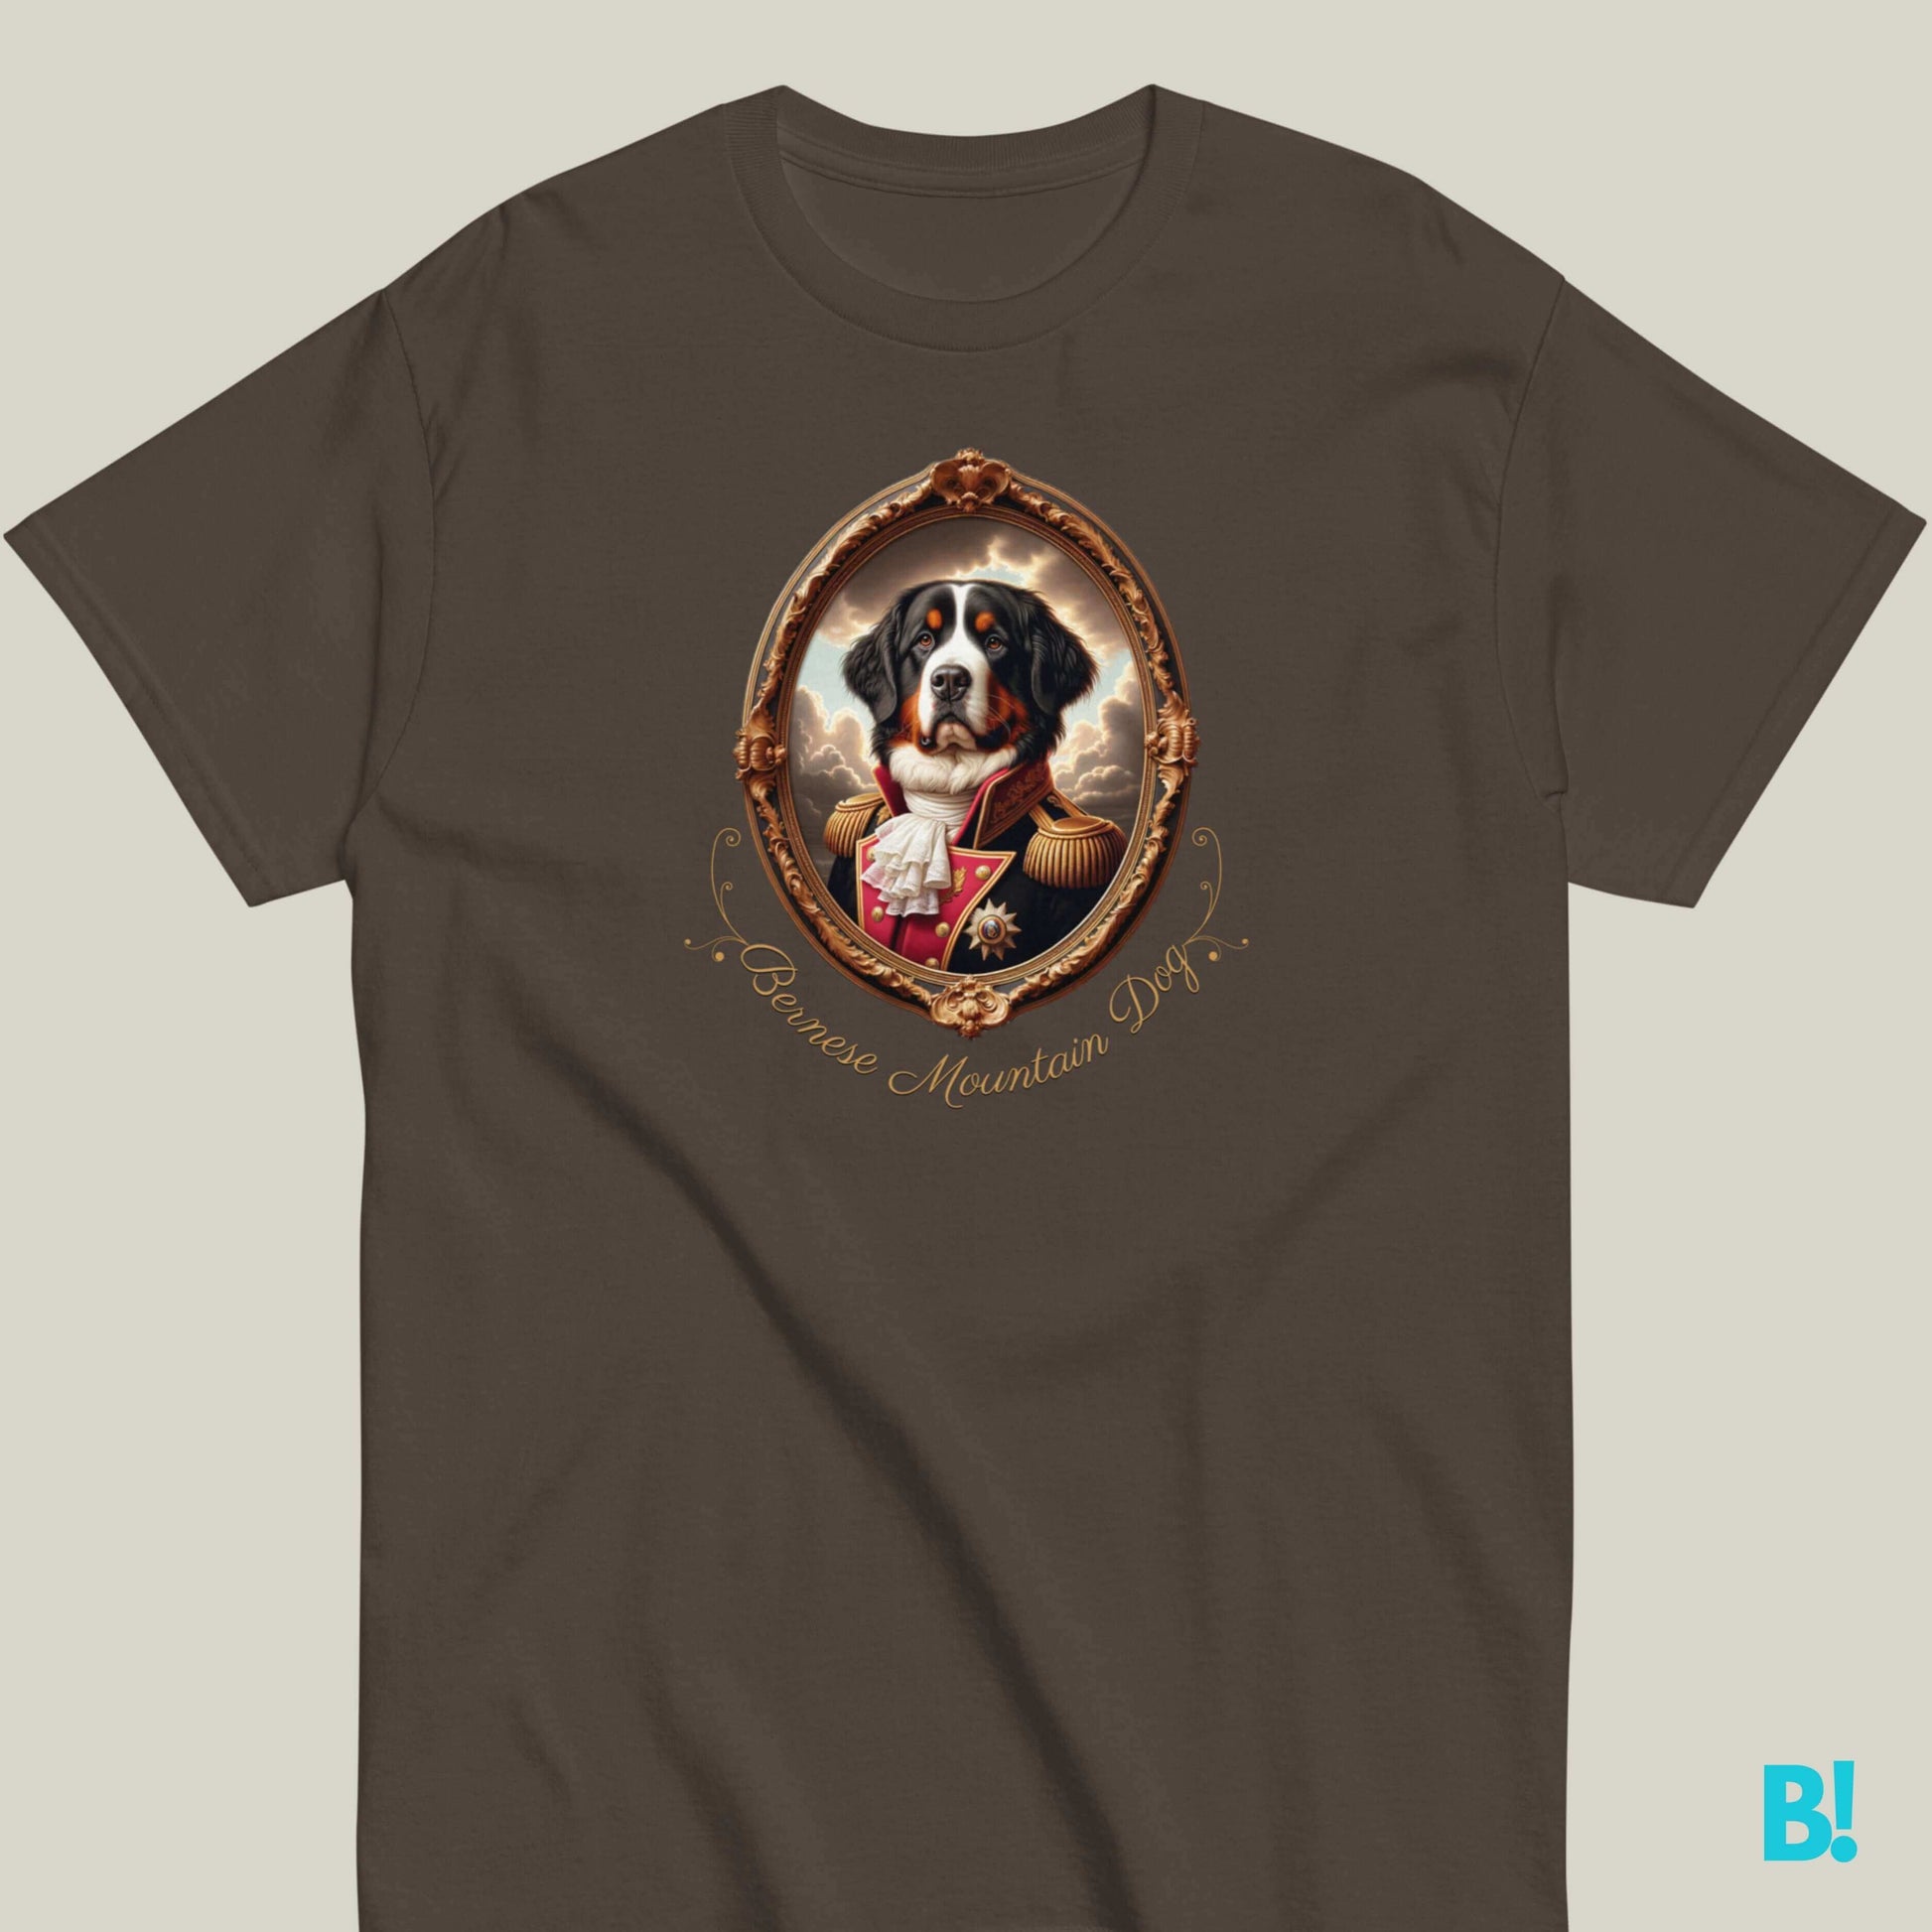 Bernese Mountain Dog Unisex T-Shirt | Shop Now Embrace the strength and loyalty of the Bernese Mountain Dog with our 100% cotton unisex tee. Available in 7 royal colors. Sizes S-XXXL. €29.50 B!NKY Comfywear